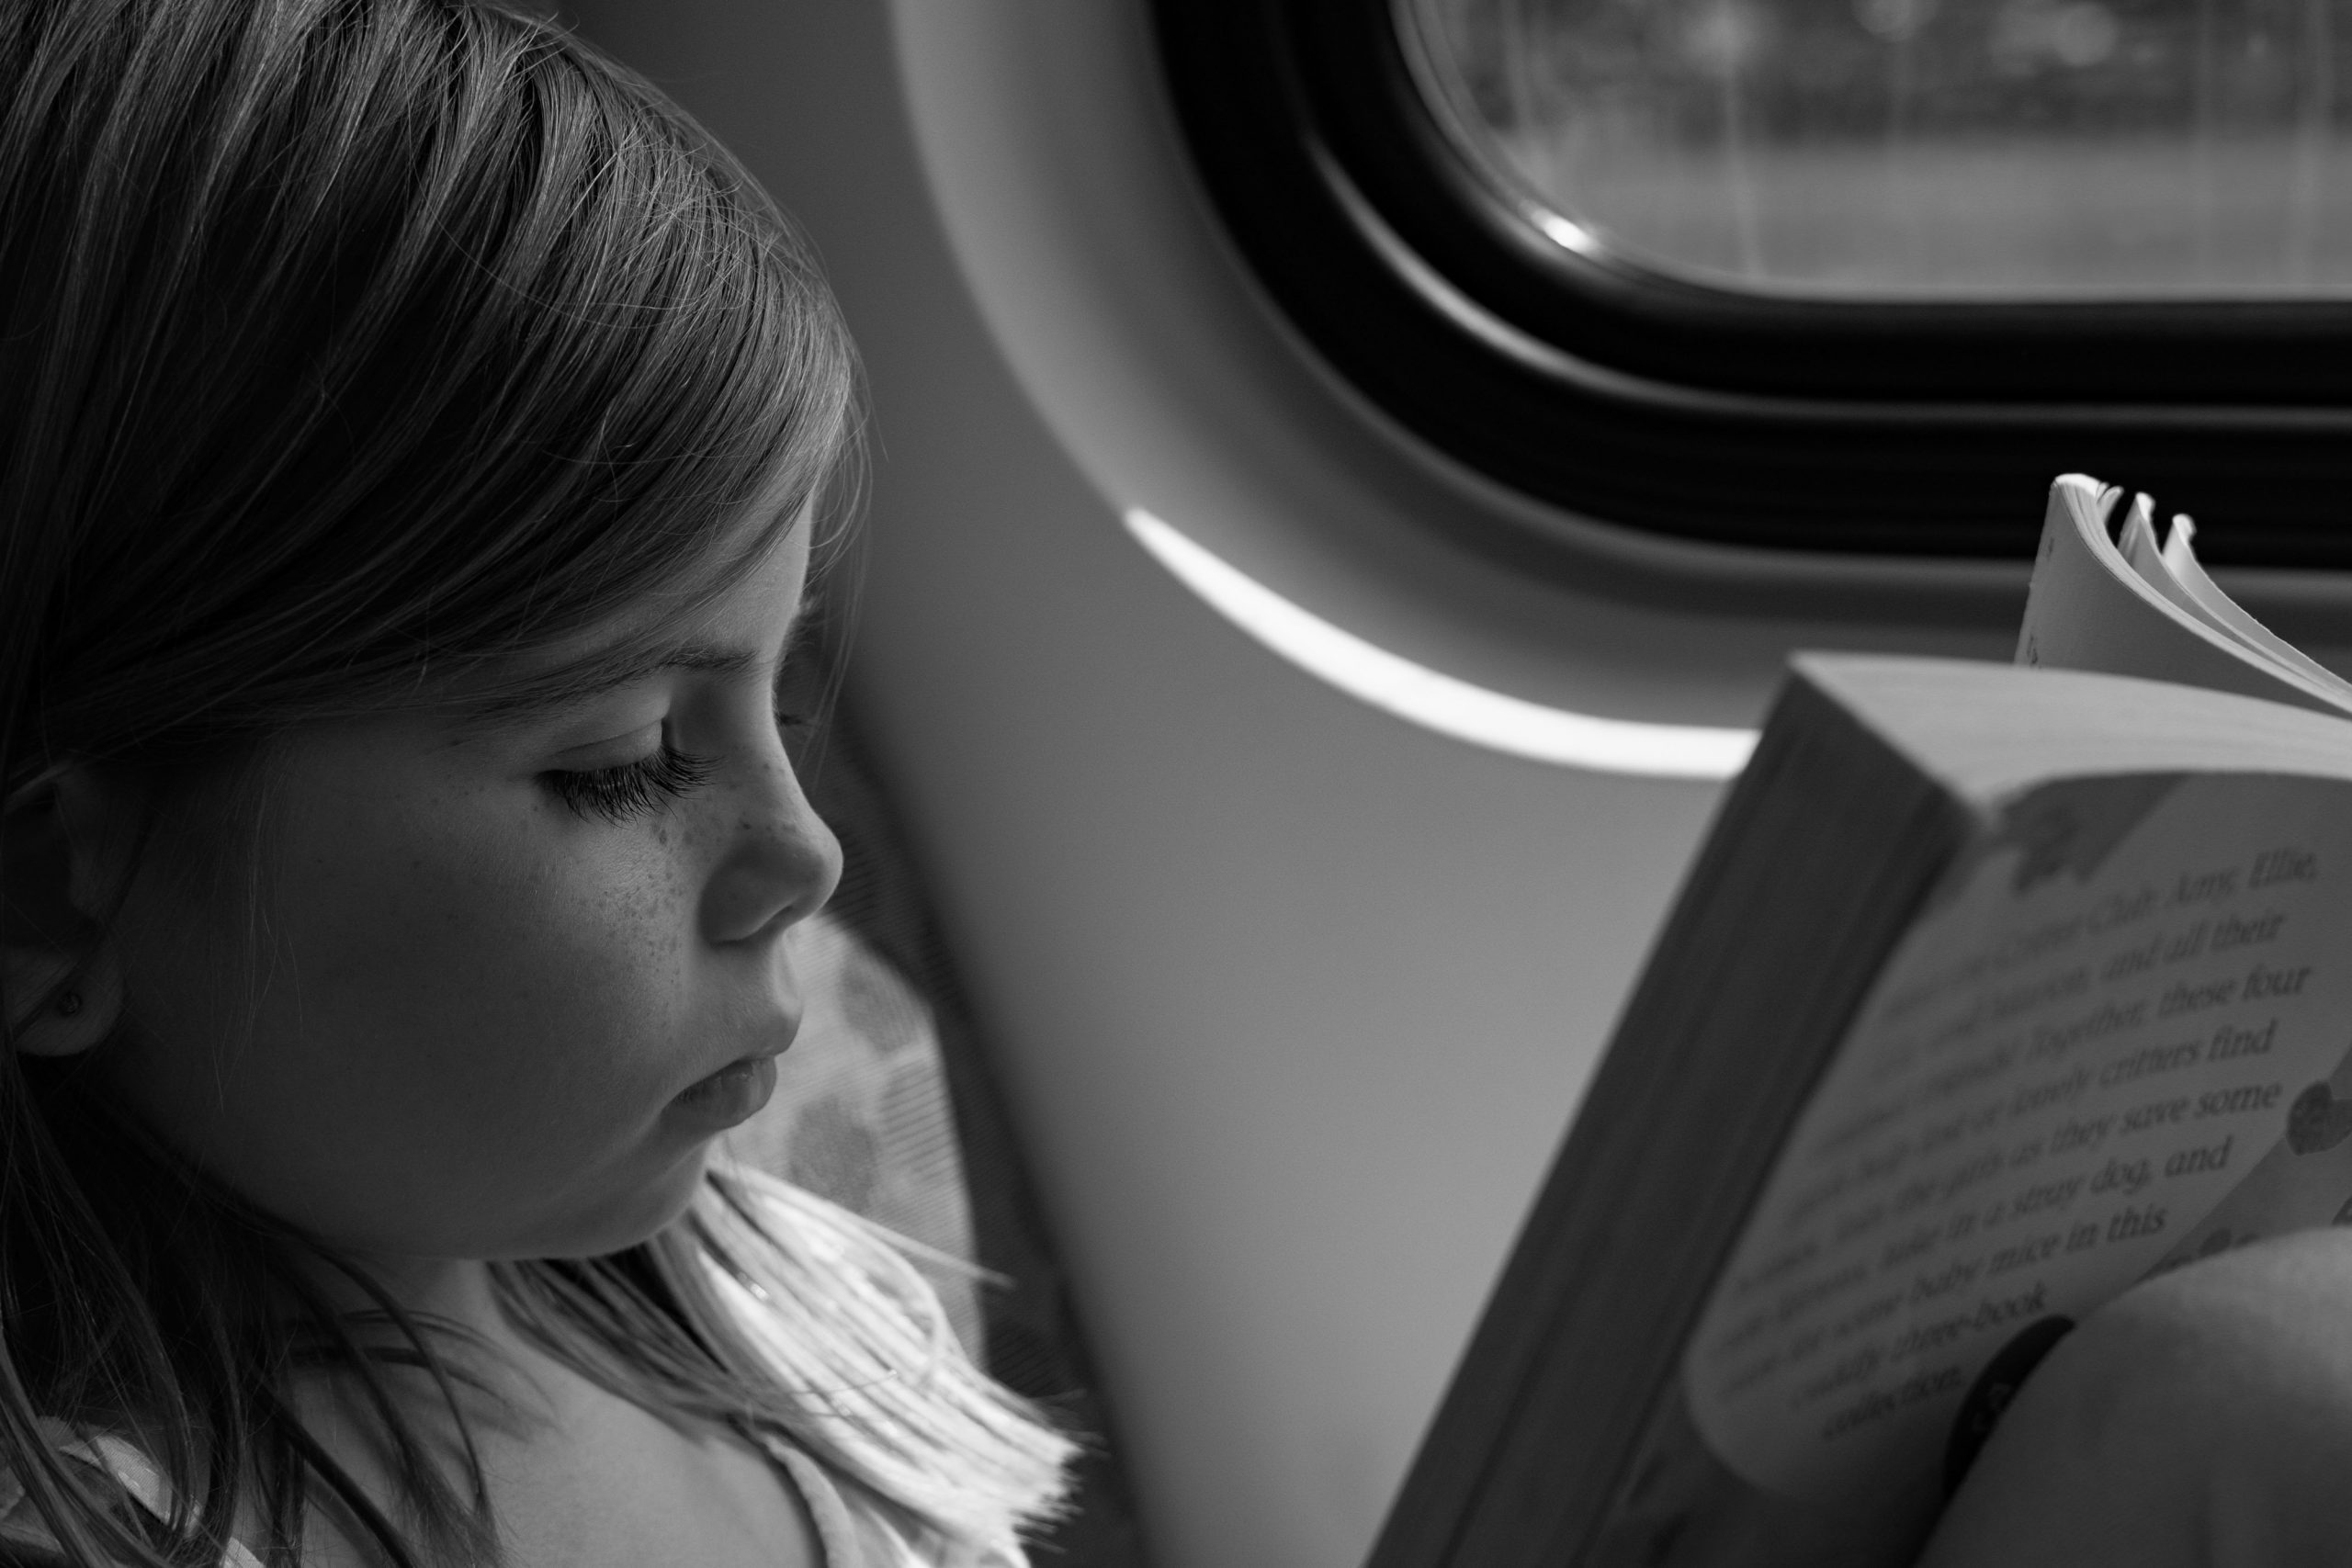 Reluctant readers: How to encourage your child to read